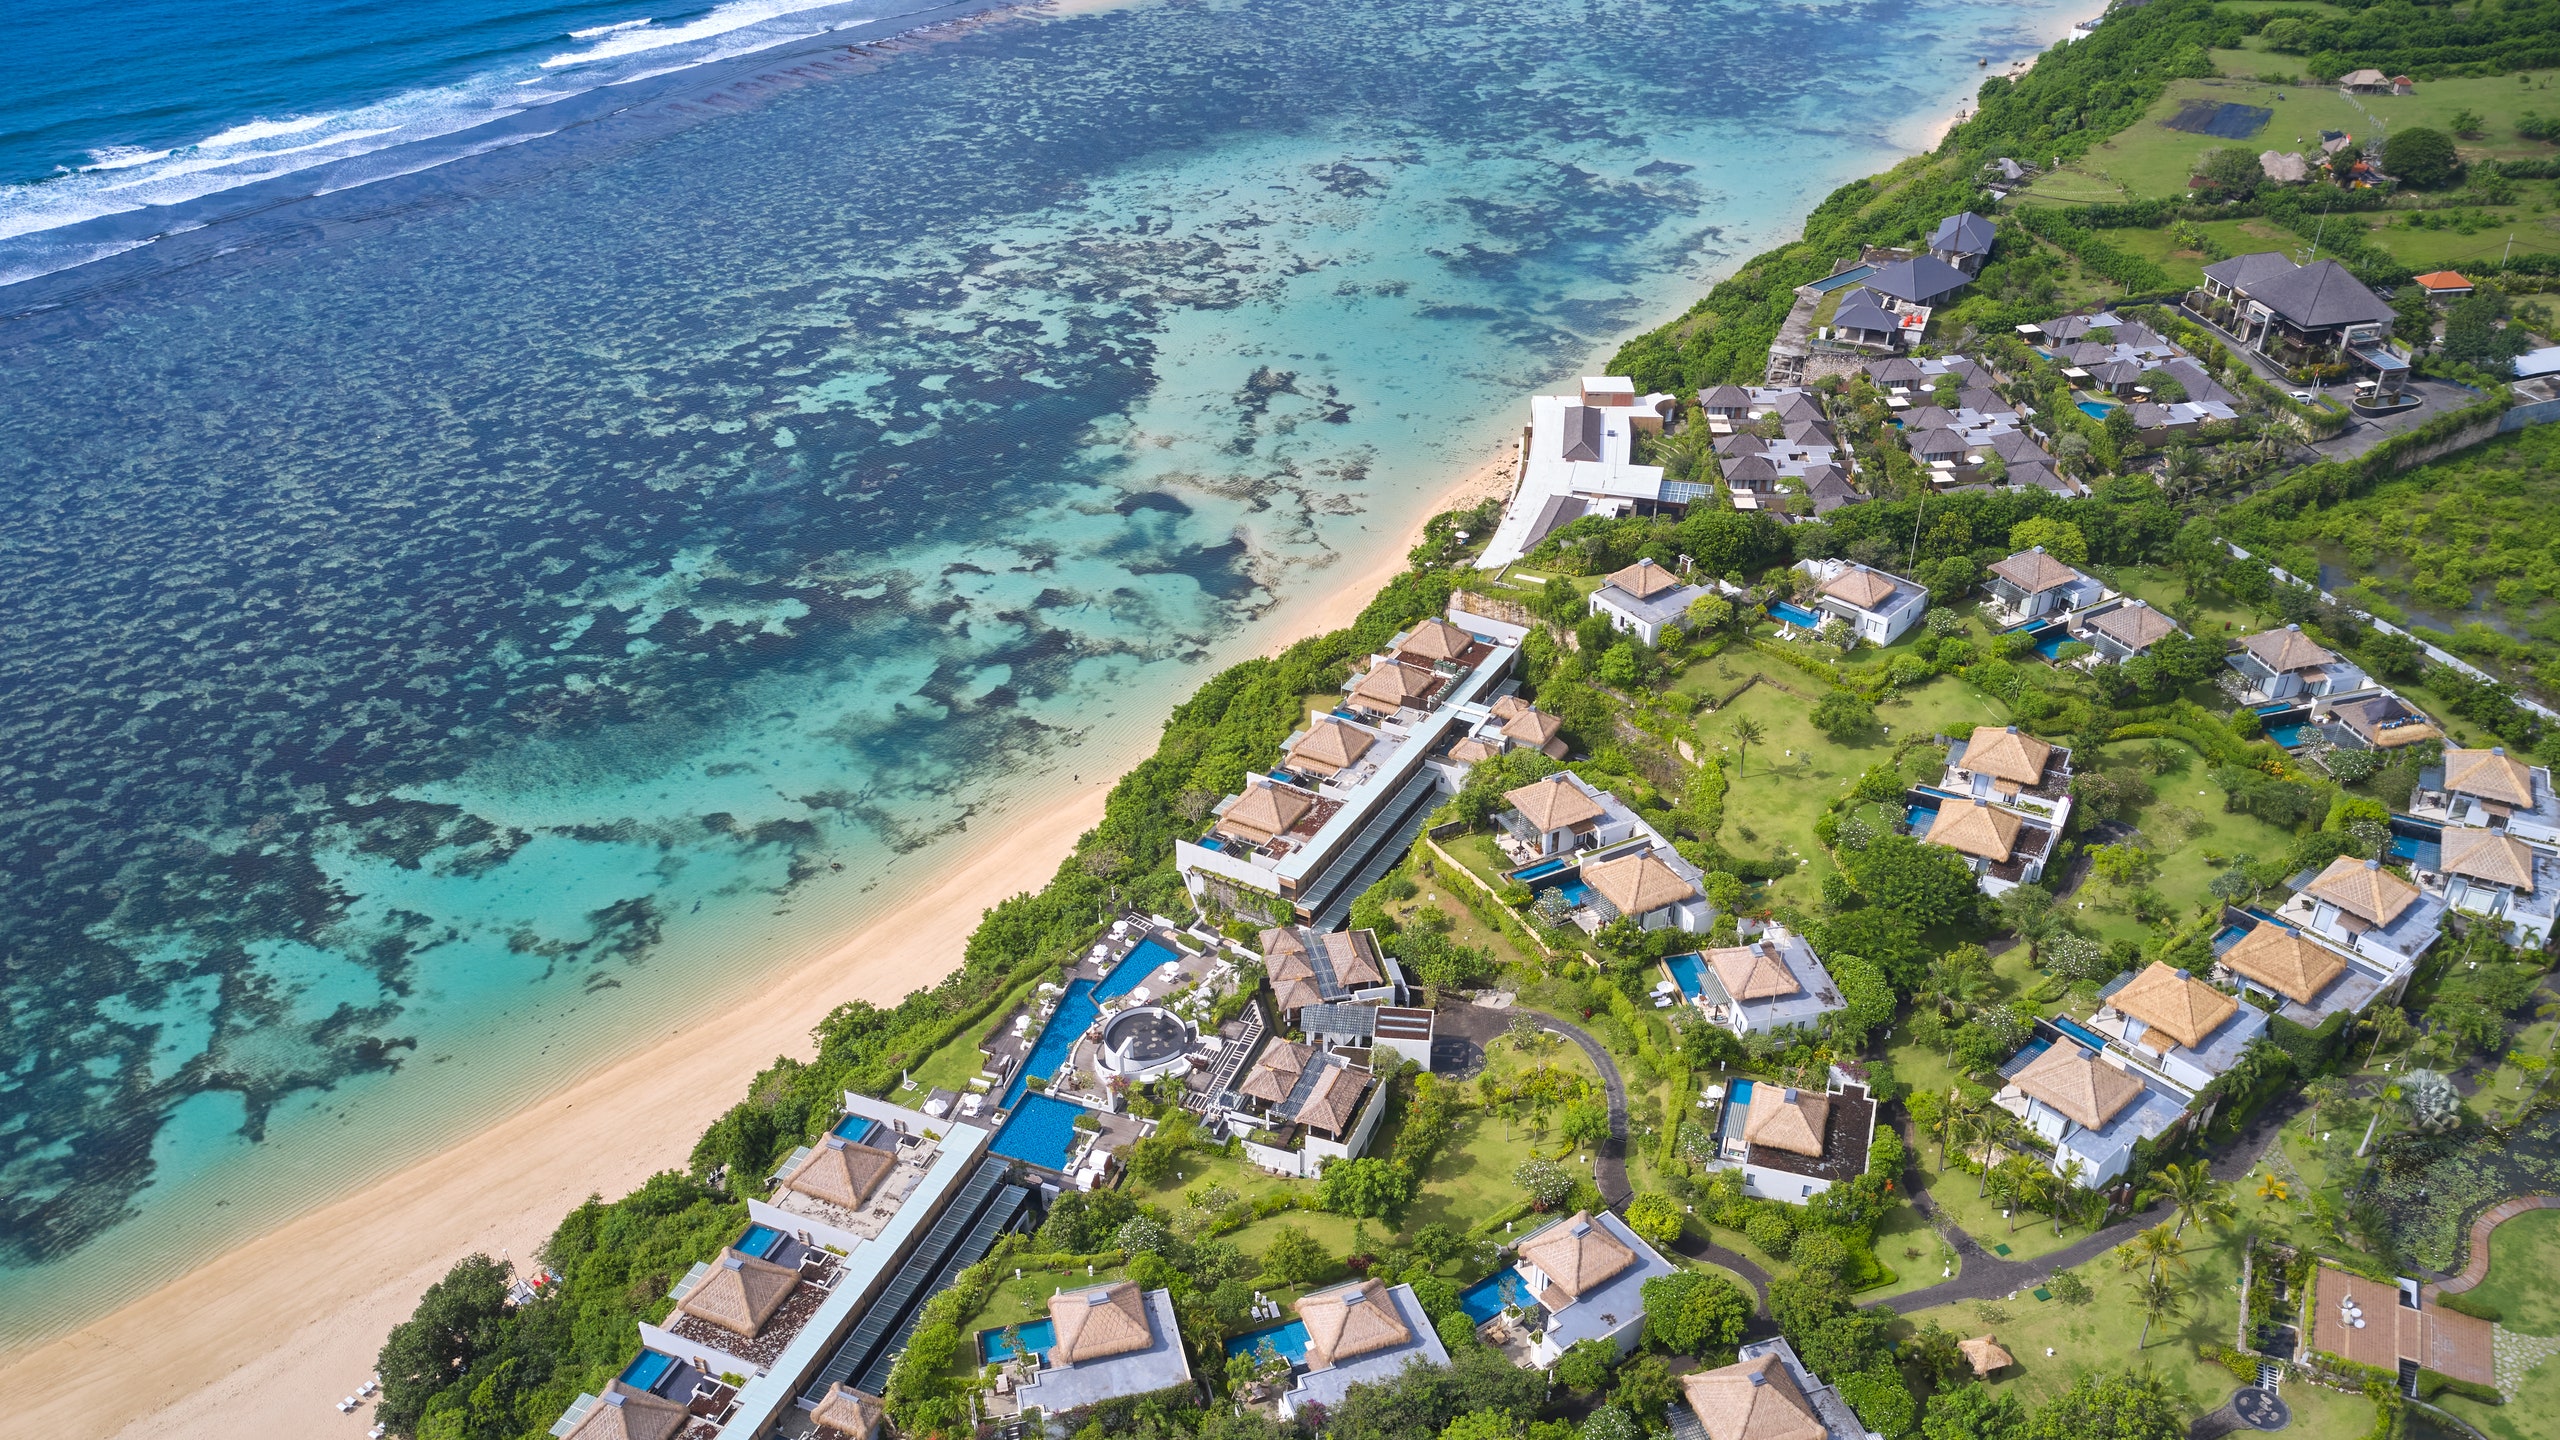 Affordable All-Inclusive Resorts: The Key to Unforgettable Budget-Friendly Vacations